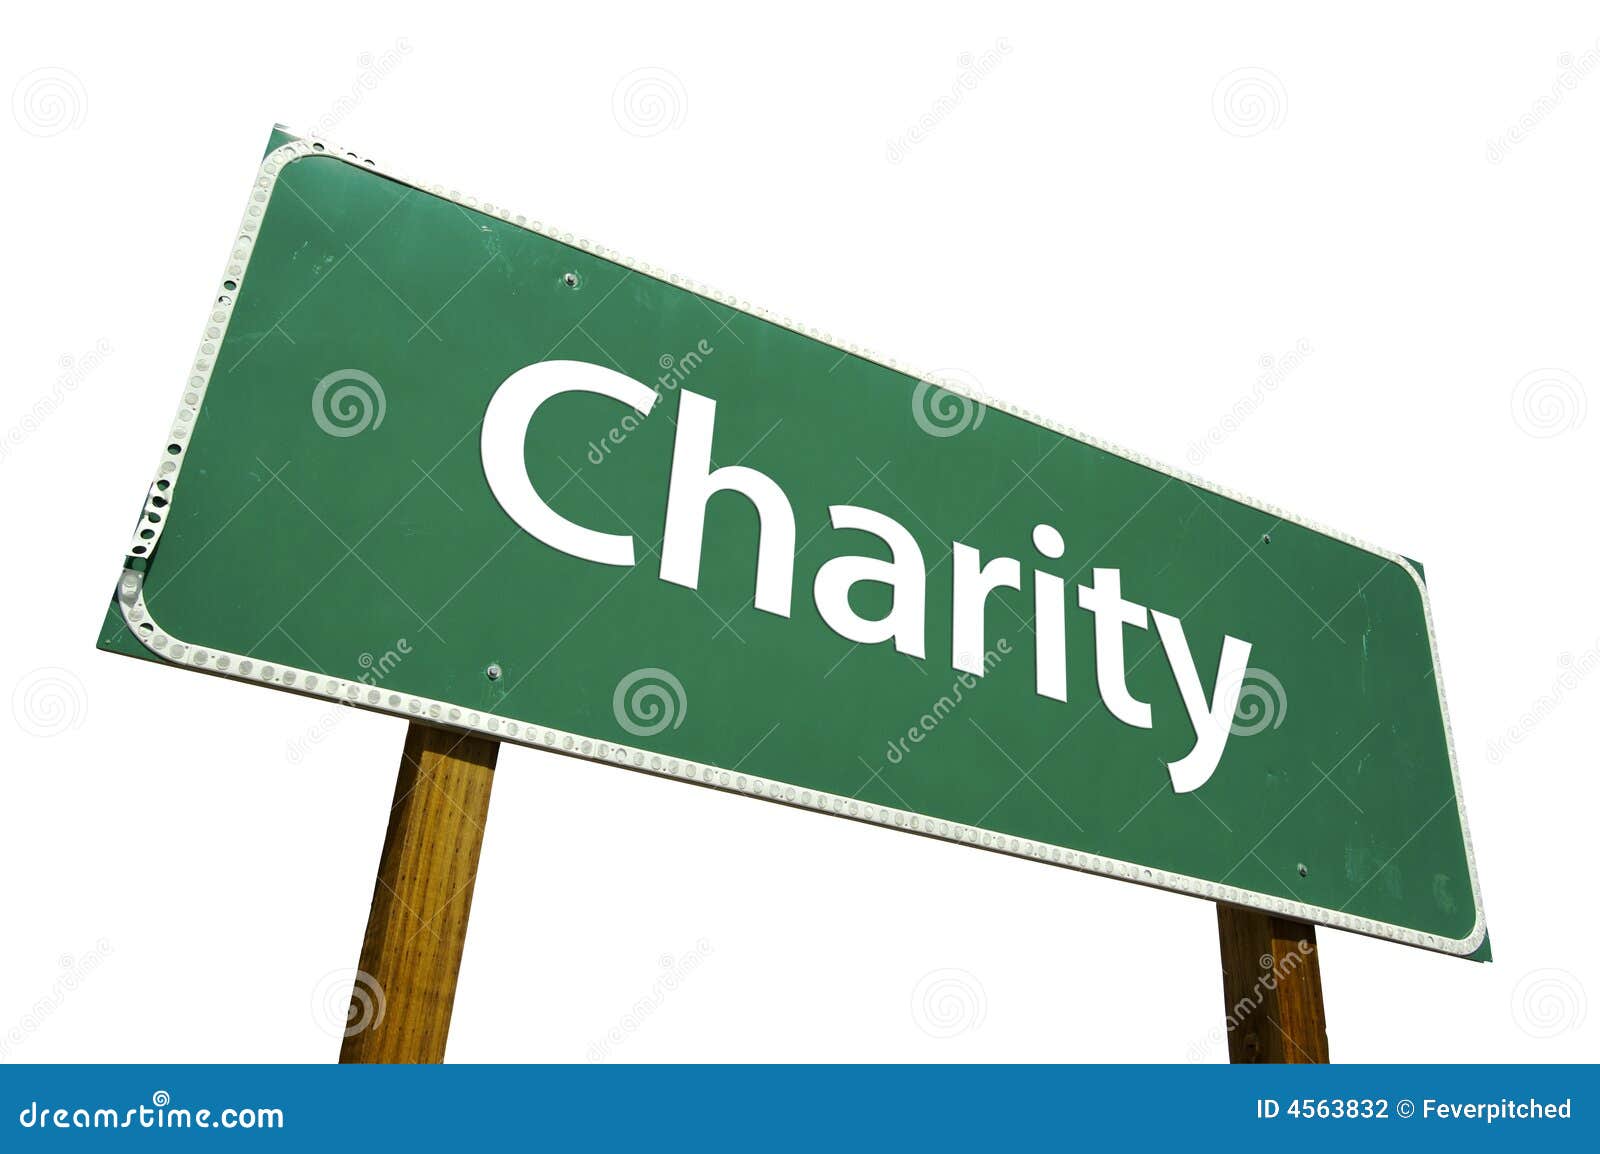 Please donate road sign. Image with clipping path Stock